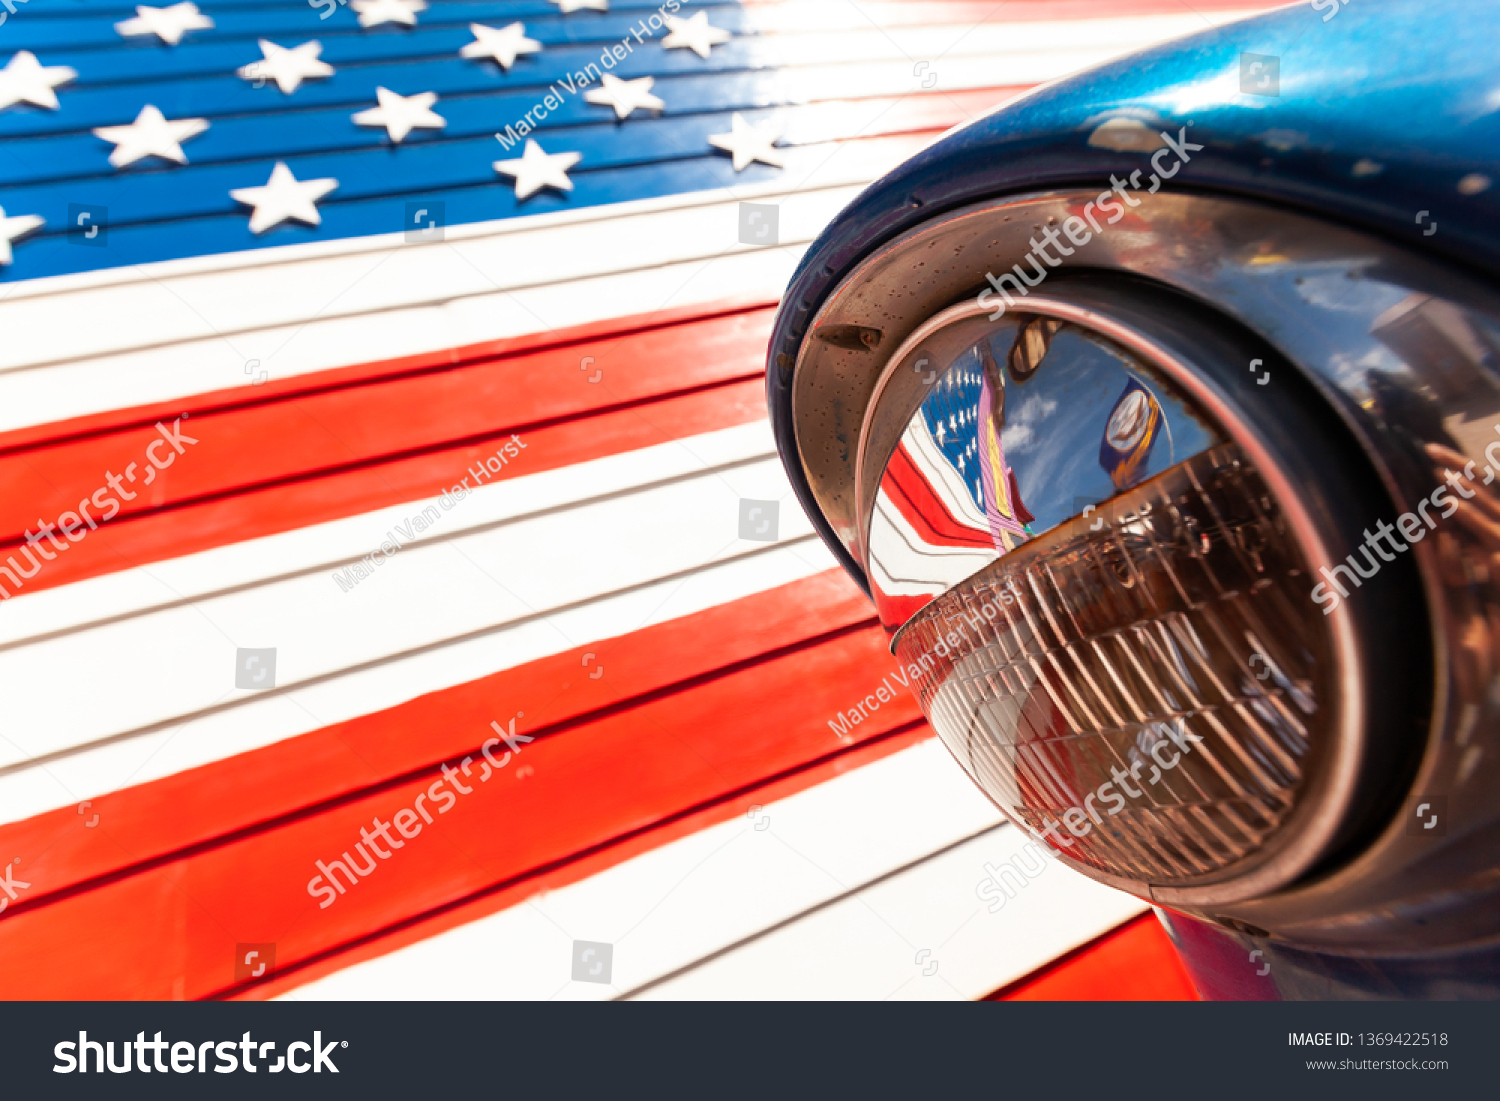 Reflection of American flag in the headlight of a classic car on route 66 america's iconic highway #1369422518